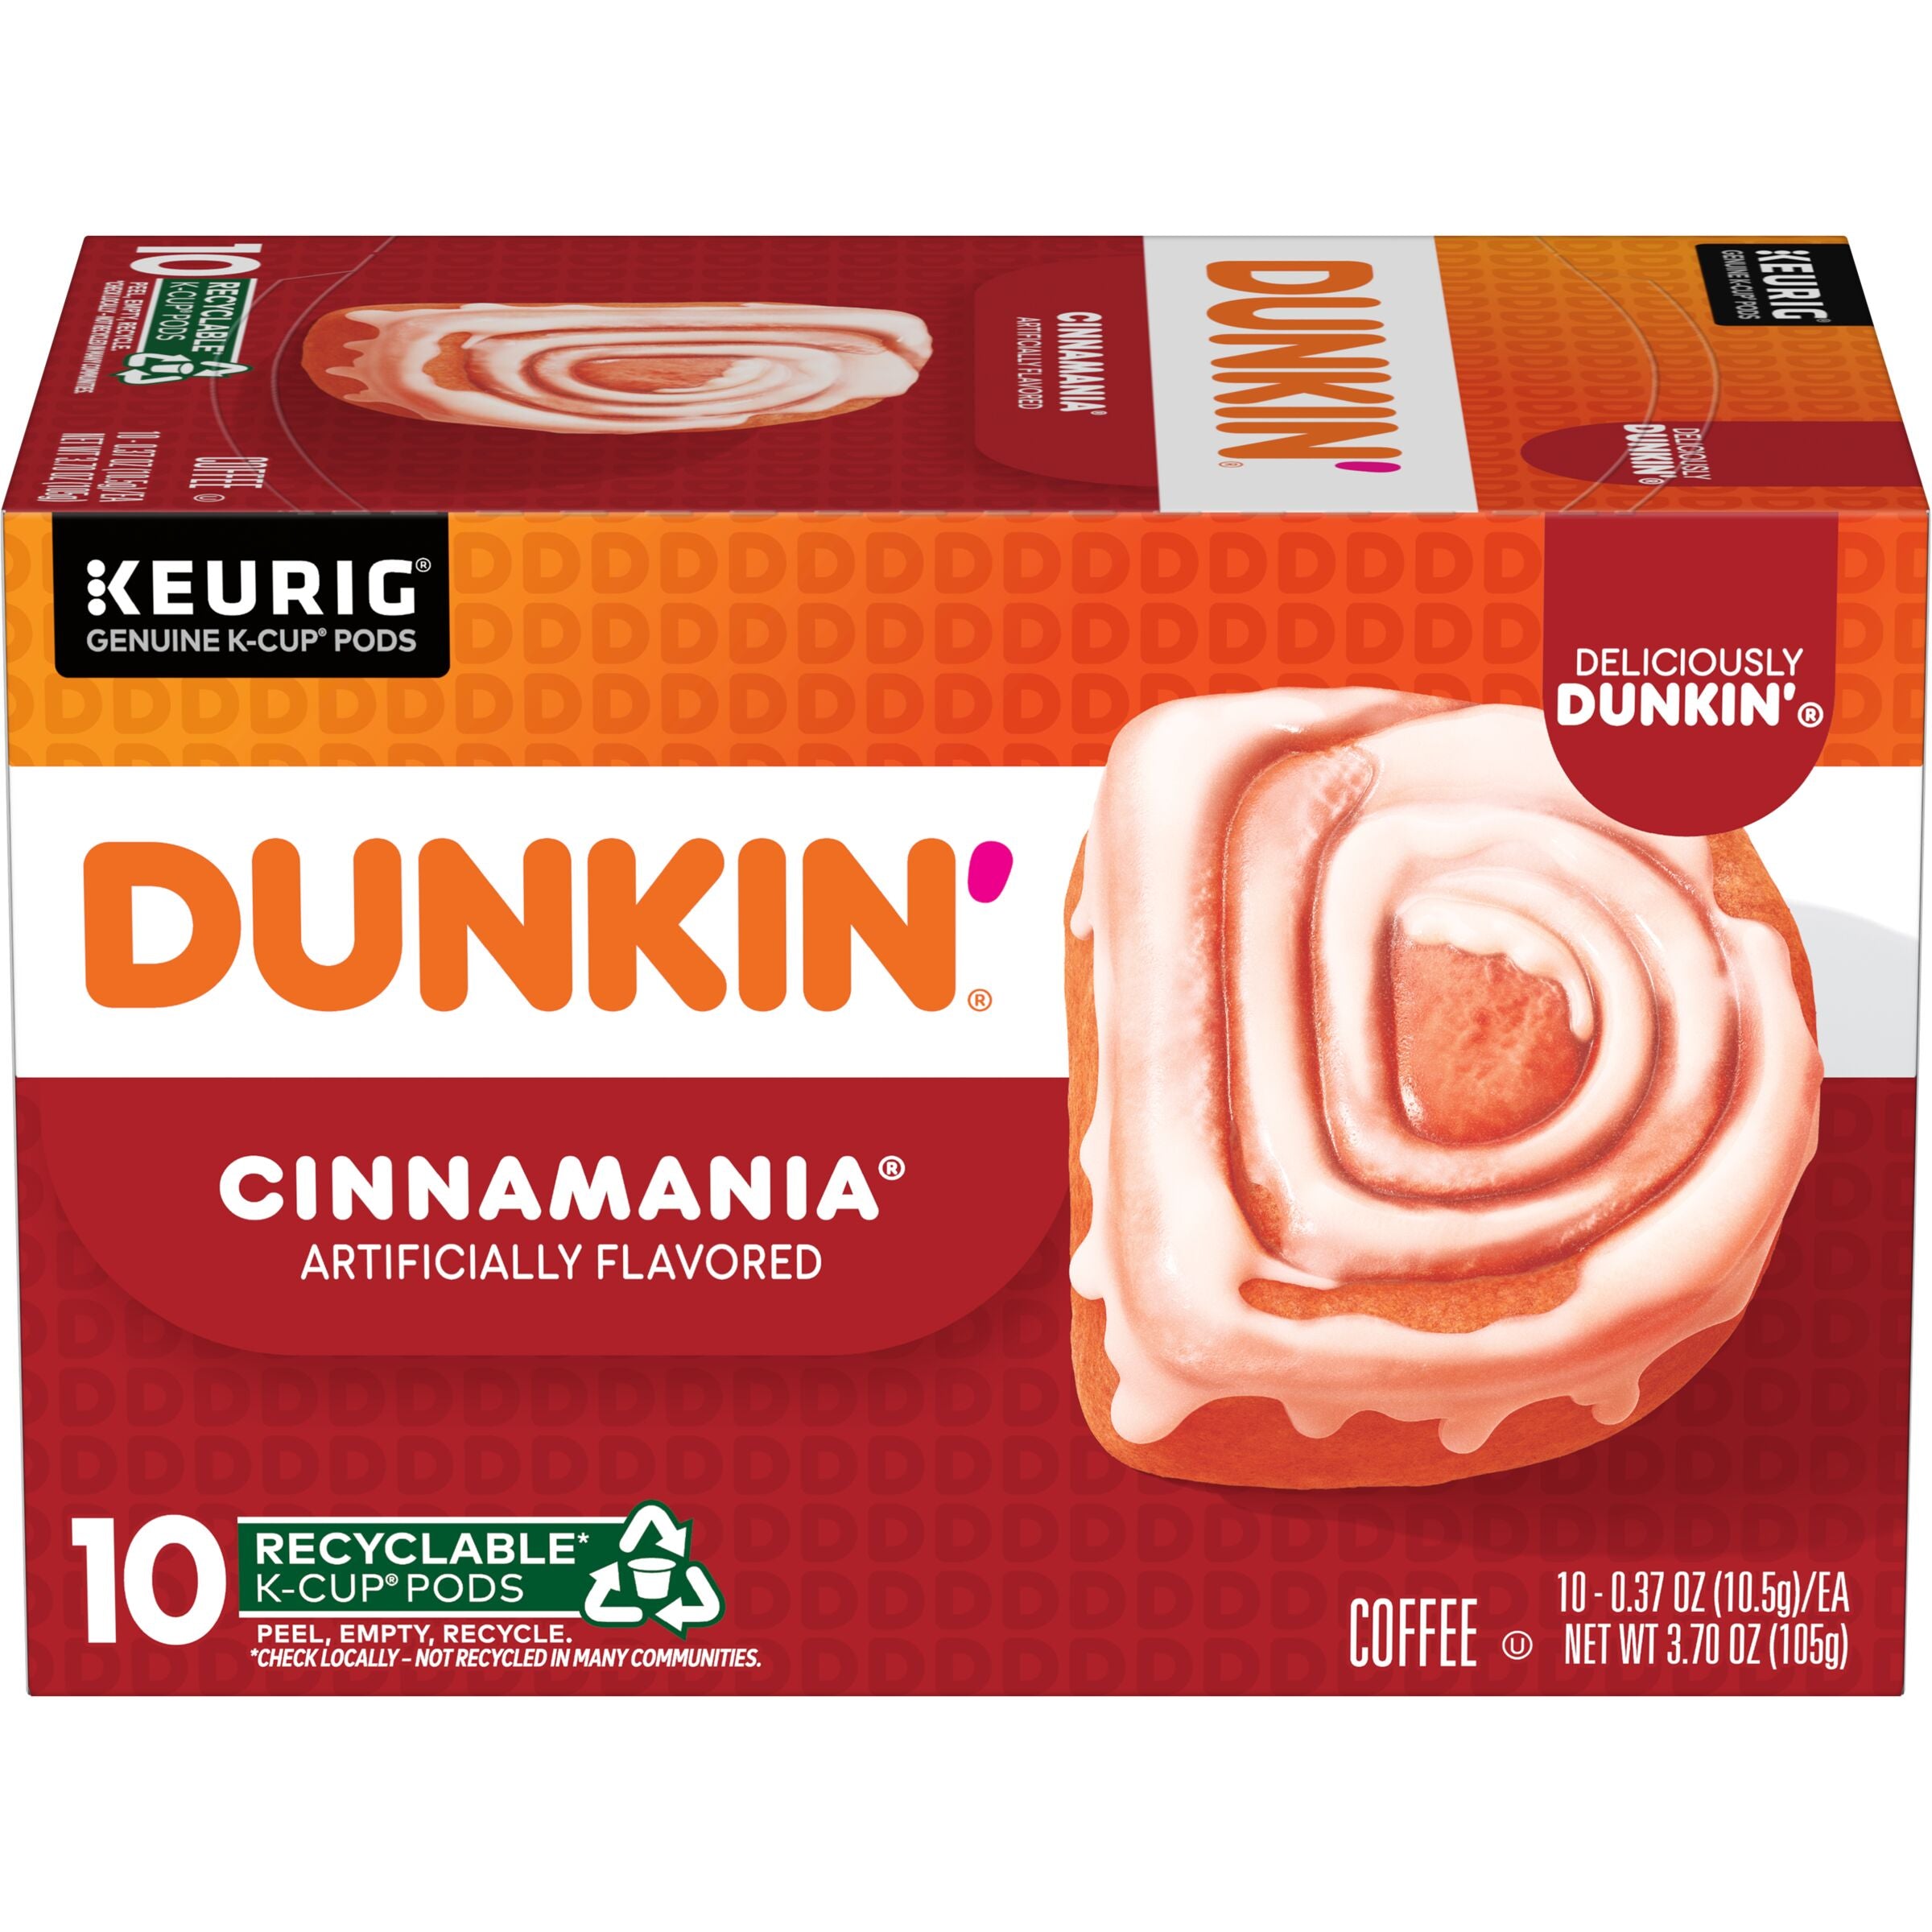 Dunkin' Cinnamania Flavored Coffee, K-Cup Pods, 10 Count